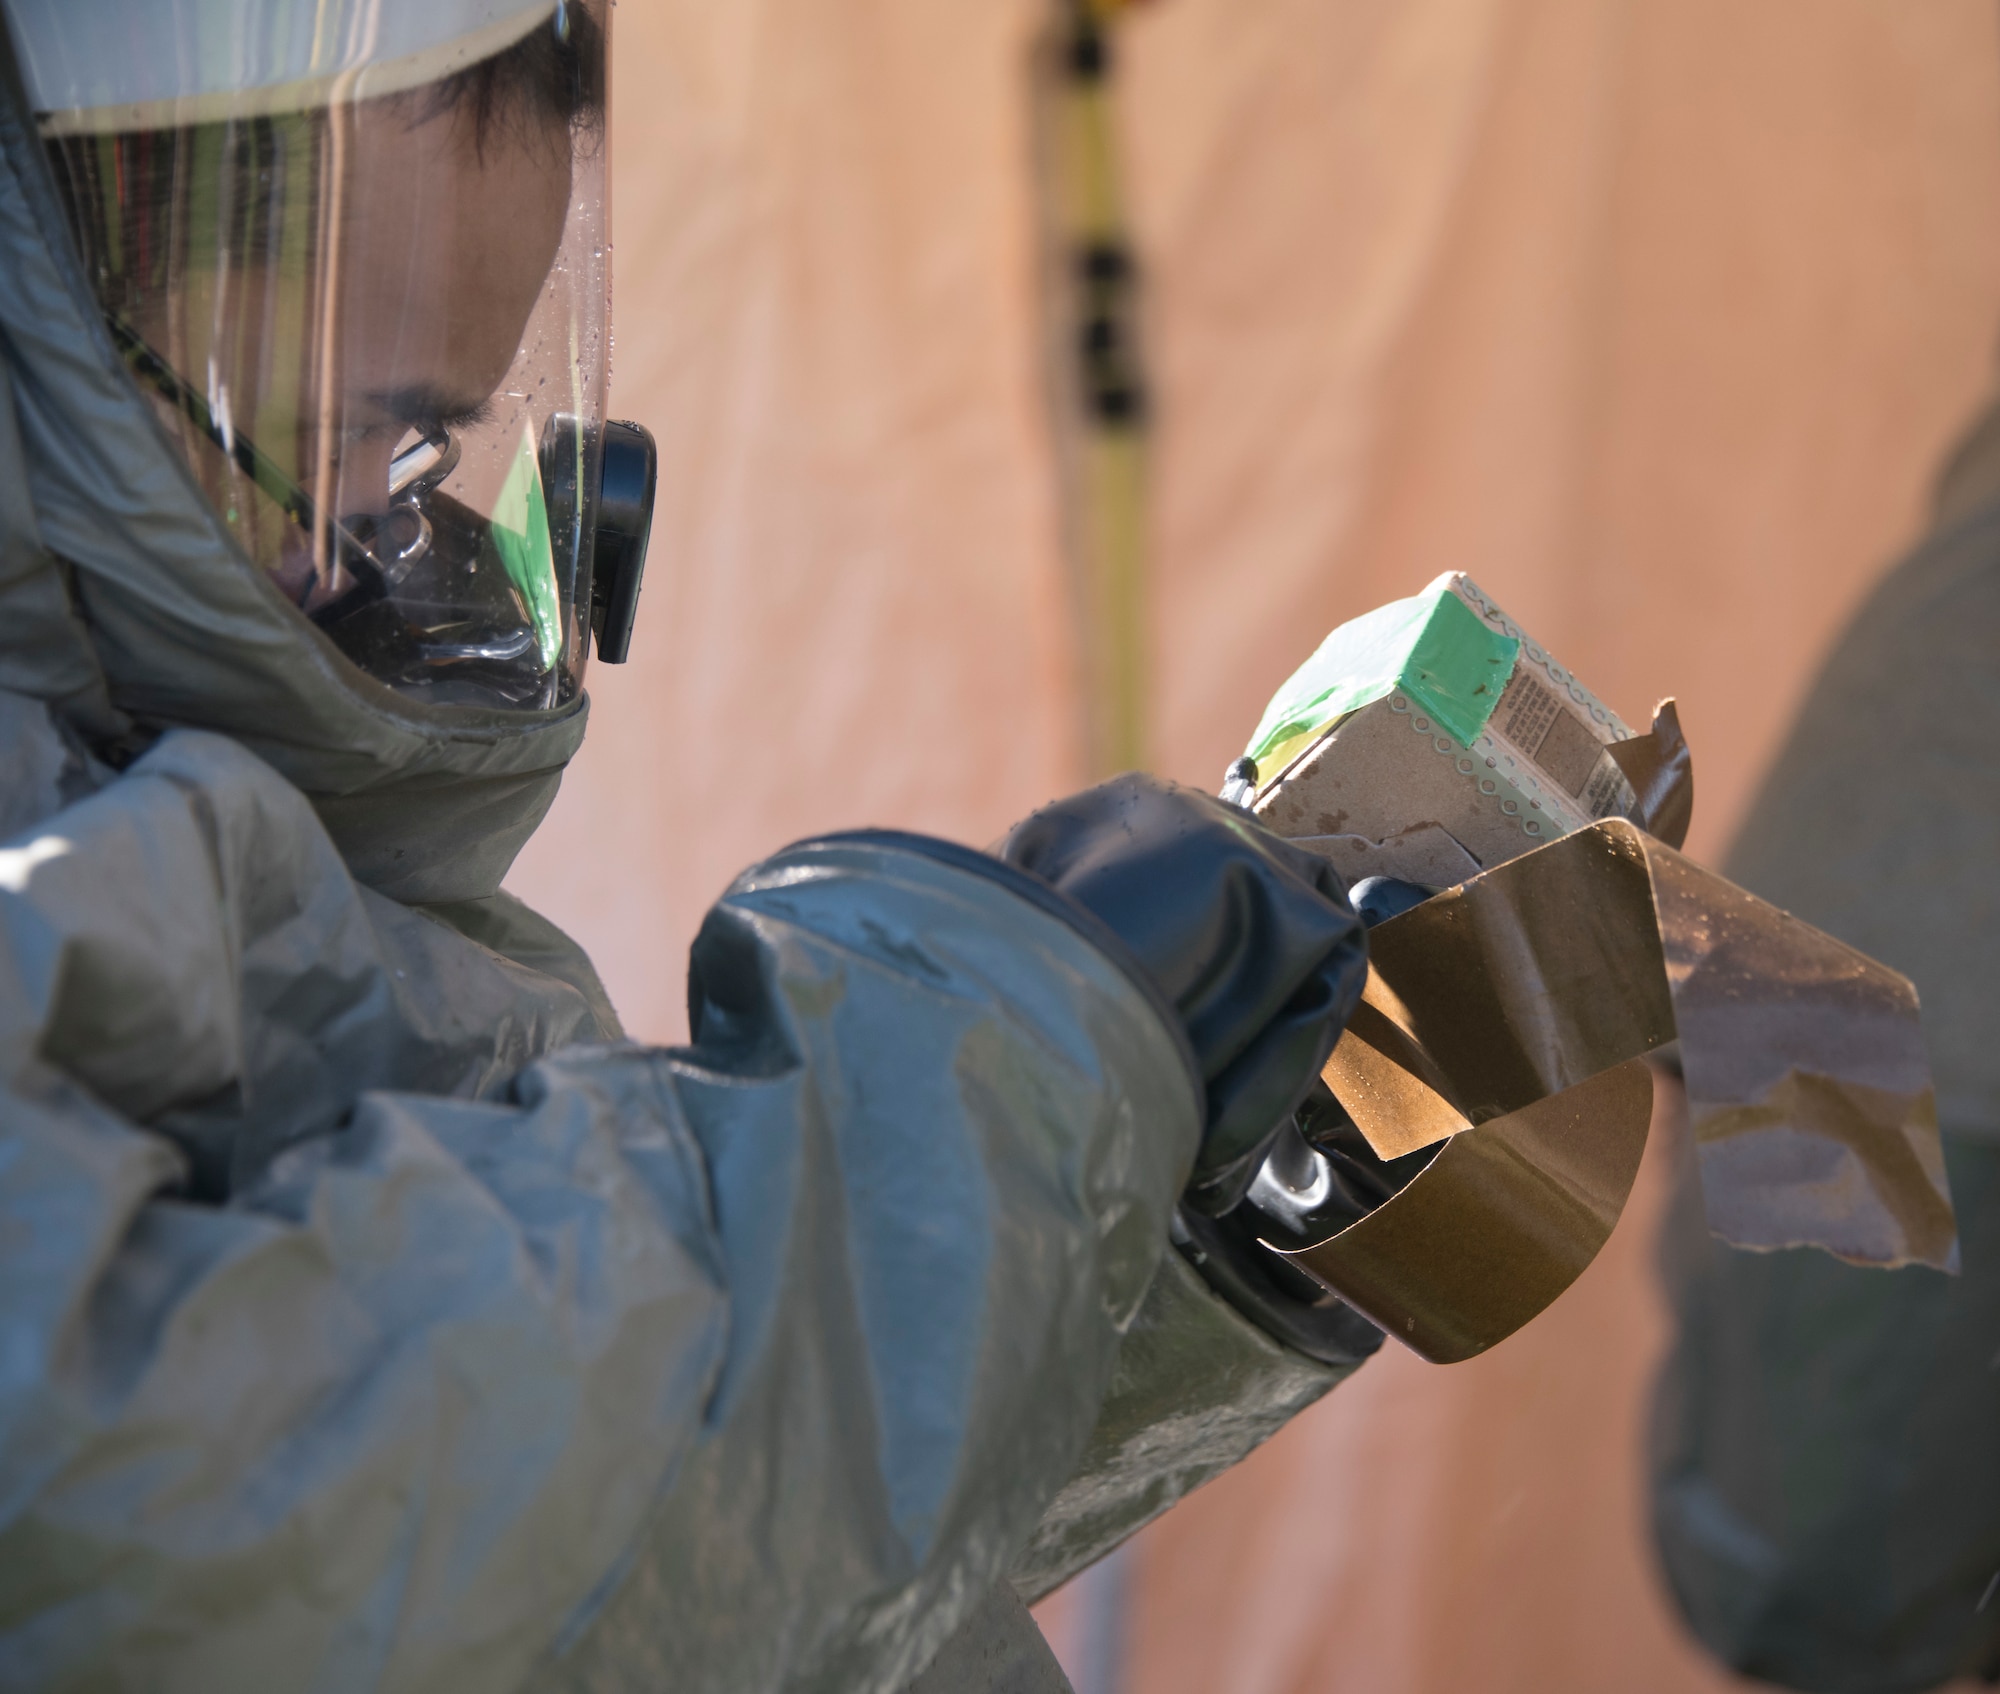 A U.S. Airman cuts simulated chemical detection tape June 27, 2019, at Travis Air Force Base, California. The tape was part of a hazardous material exercise at David Grant USAF Medical Center. (U.S. Air Force photo by Staff Sgt. Amber Carter)